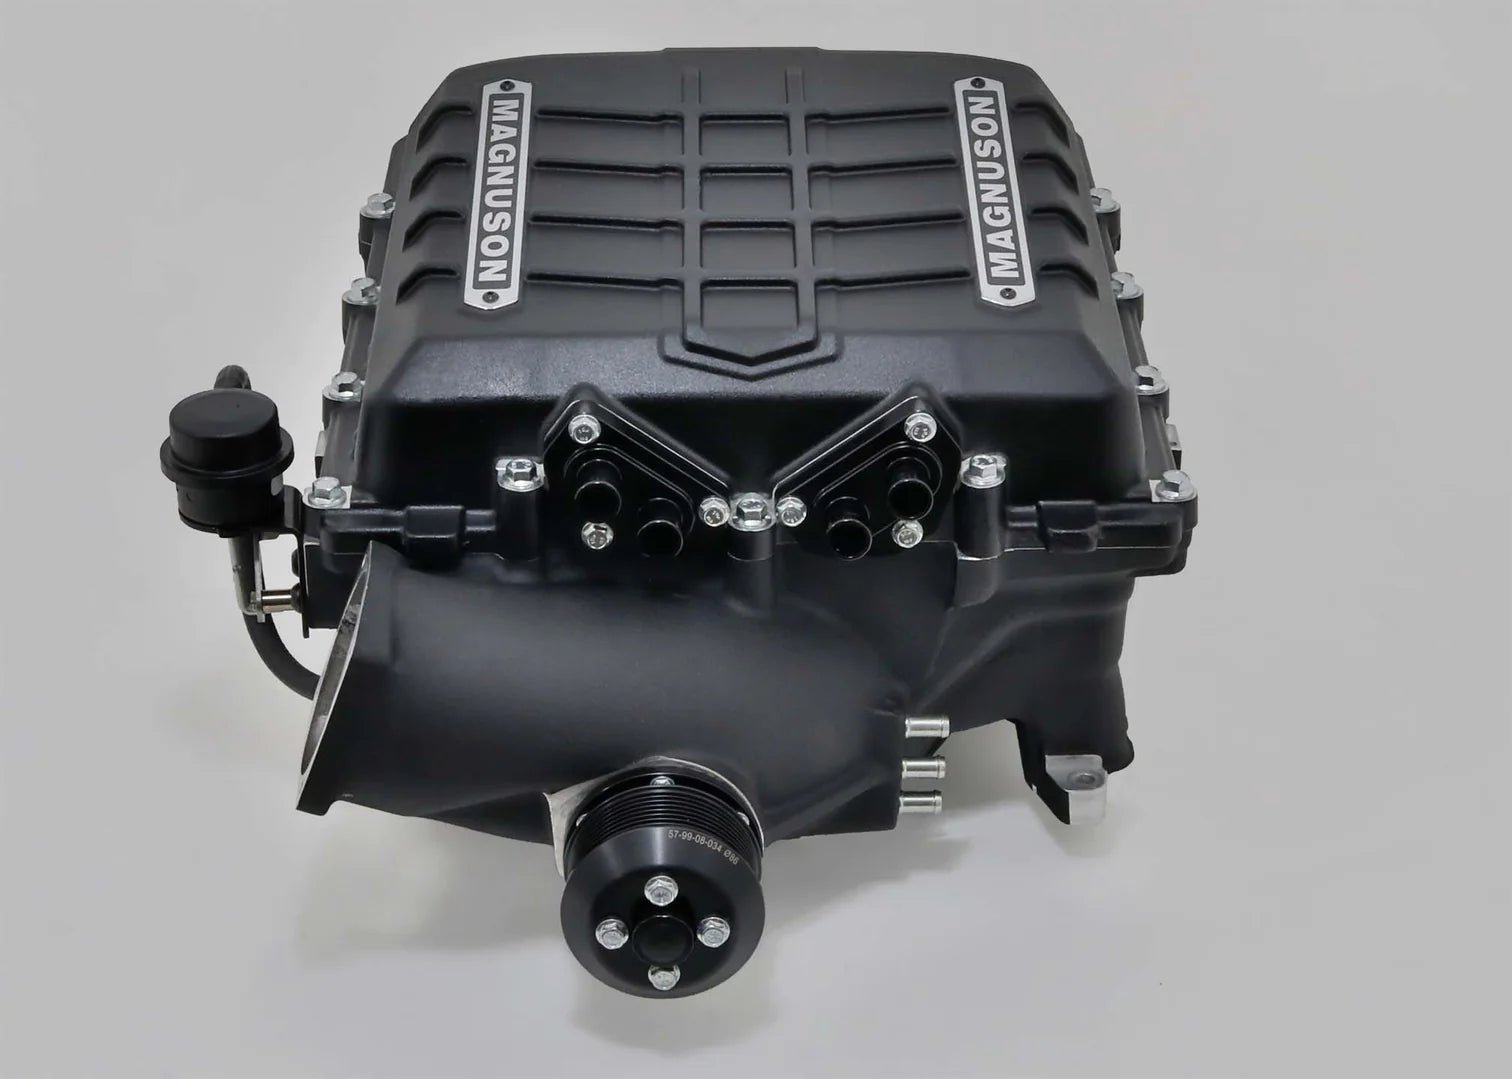 '07-18 Toyota Tundra Supercharger System Magnuson Superchargers (front part)